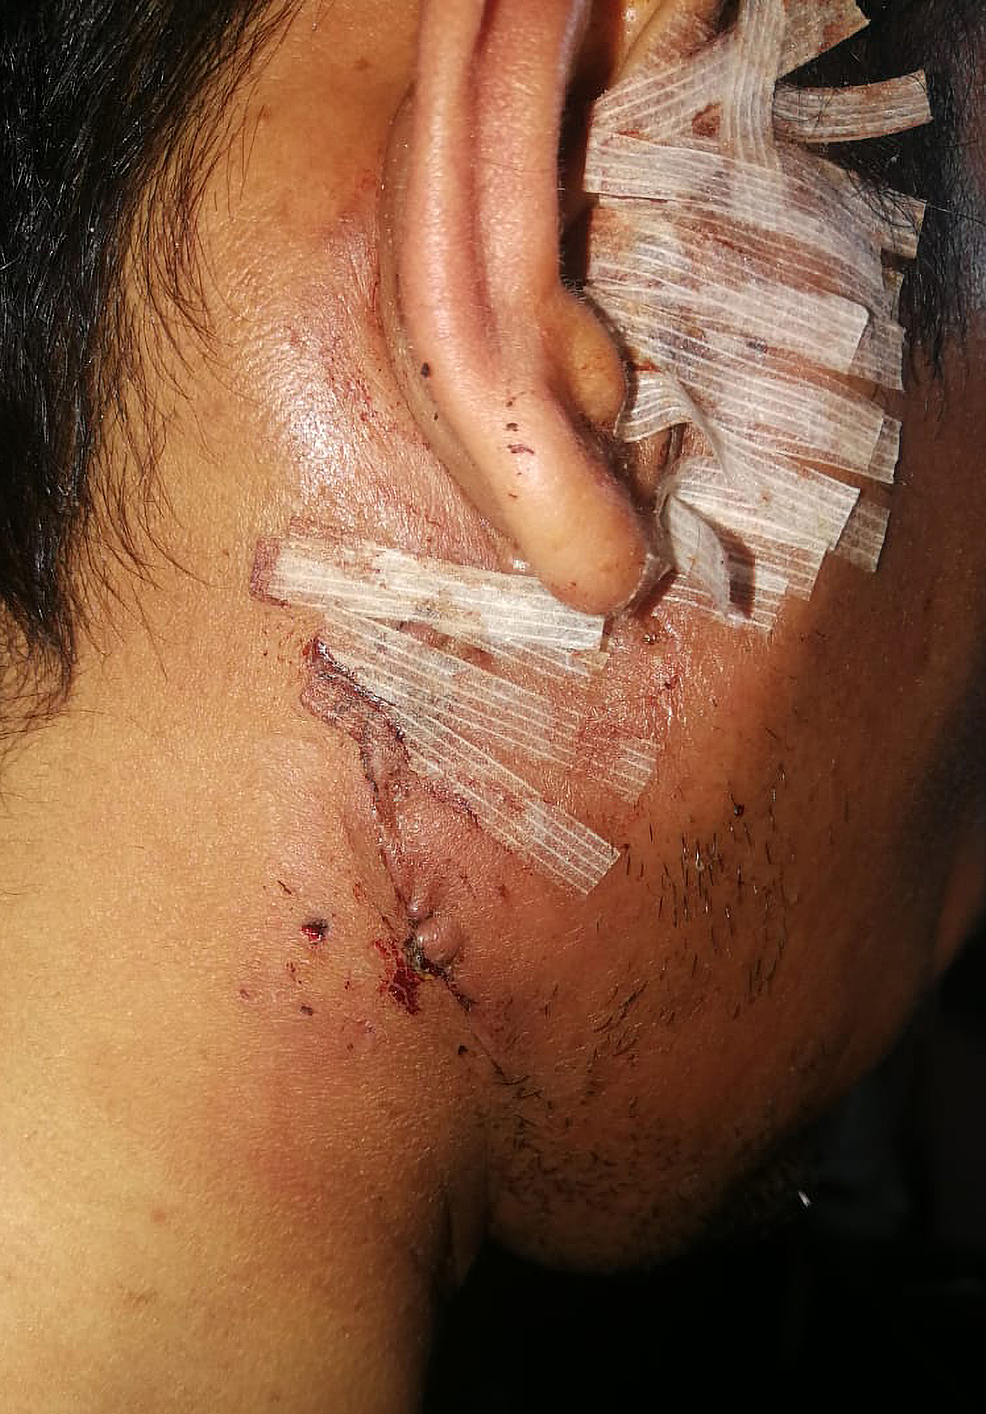 Image-on-the-first-postoperative-day-showing-clean-wound-and-intact-facial-nerve